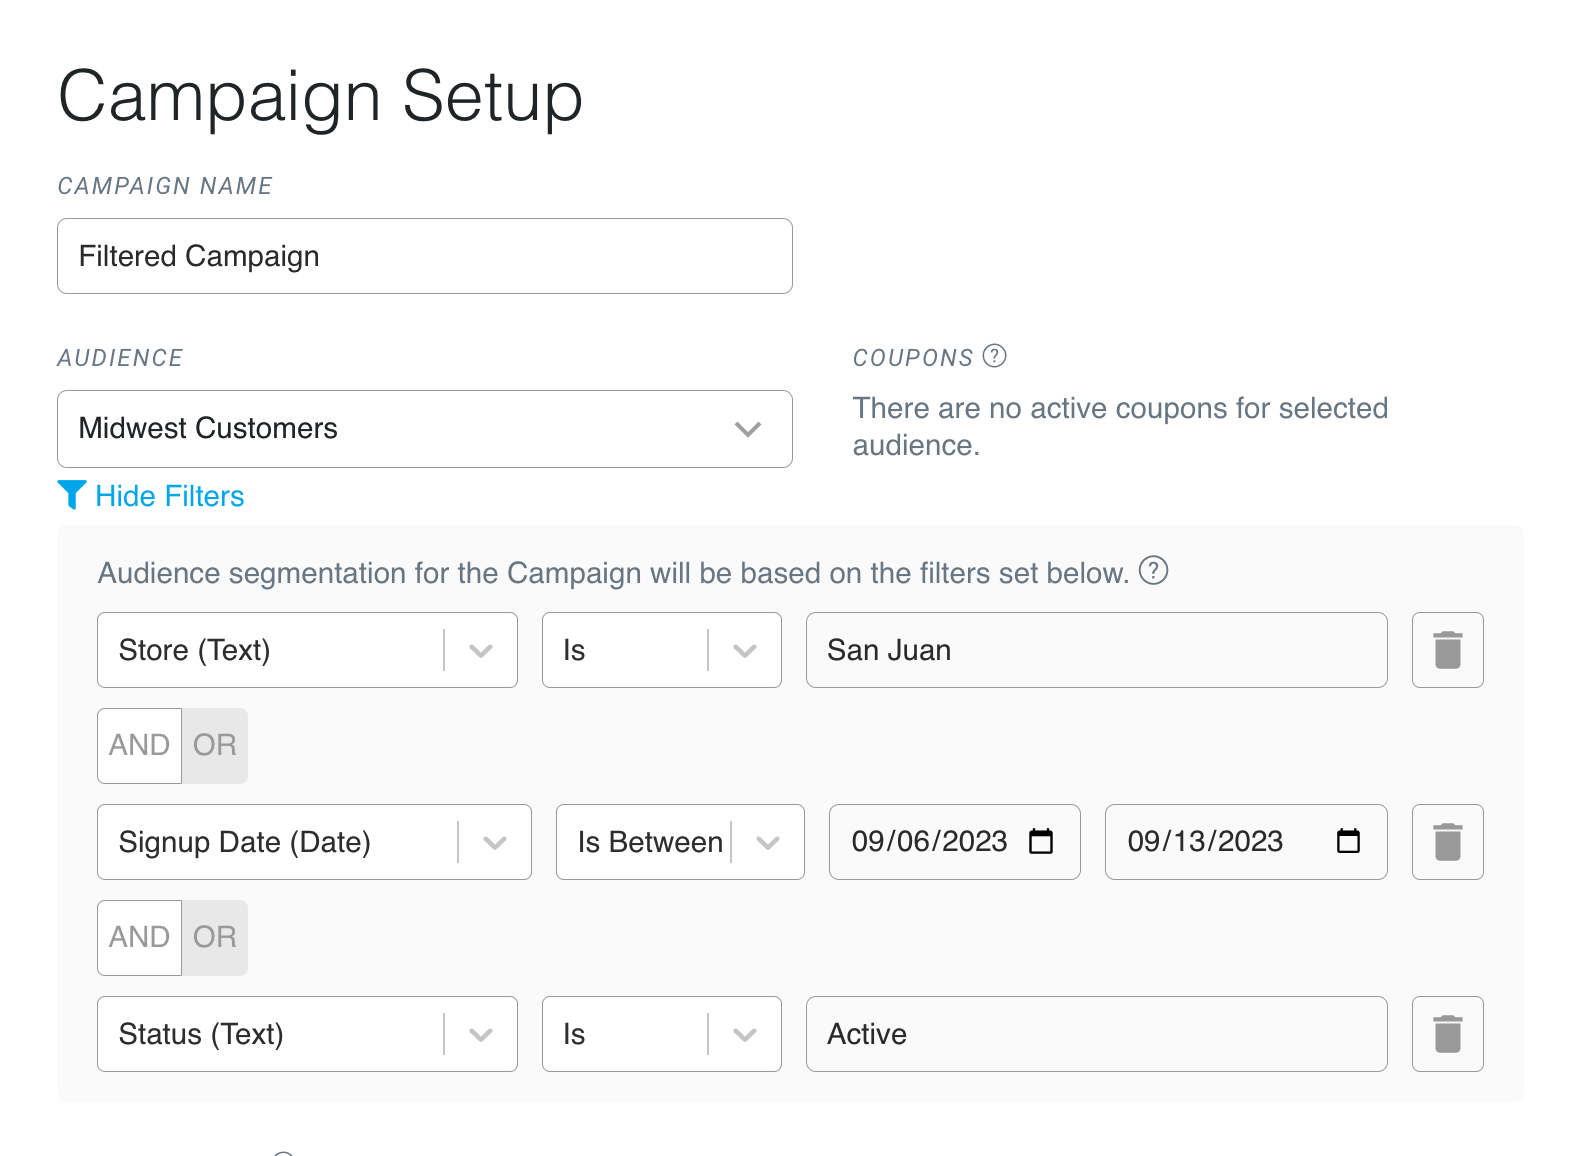 Filter Campaigns